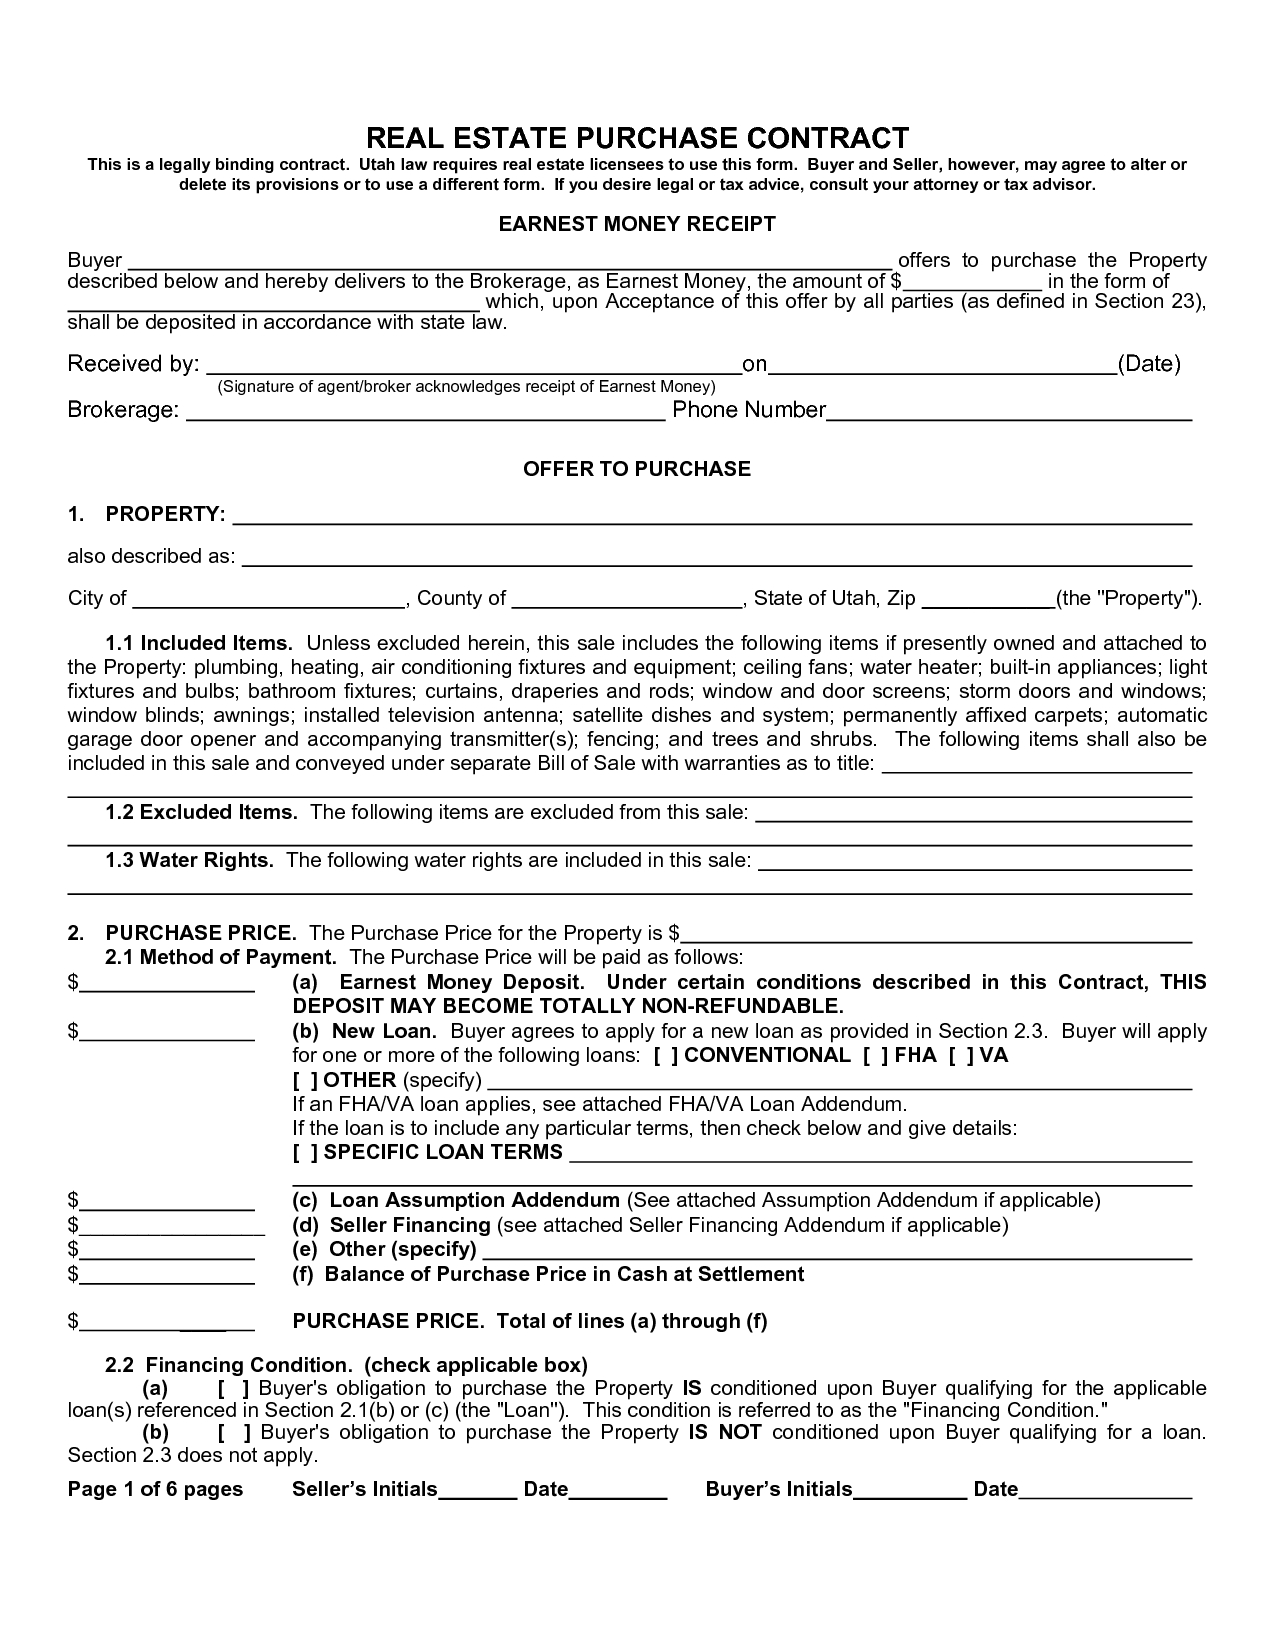 Real Estate Purchase Agreement Form Sample Image Gallery - Imggrid - Free Printable Real Estate Contracts